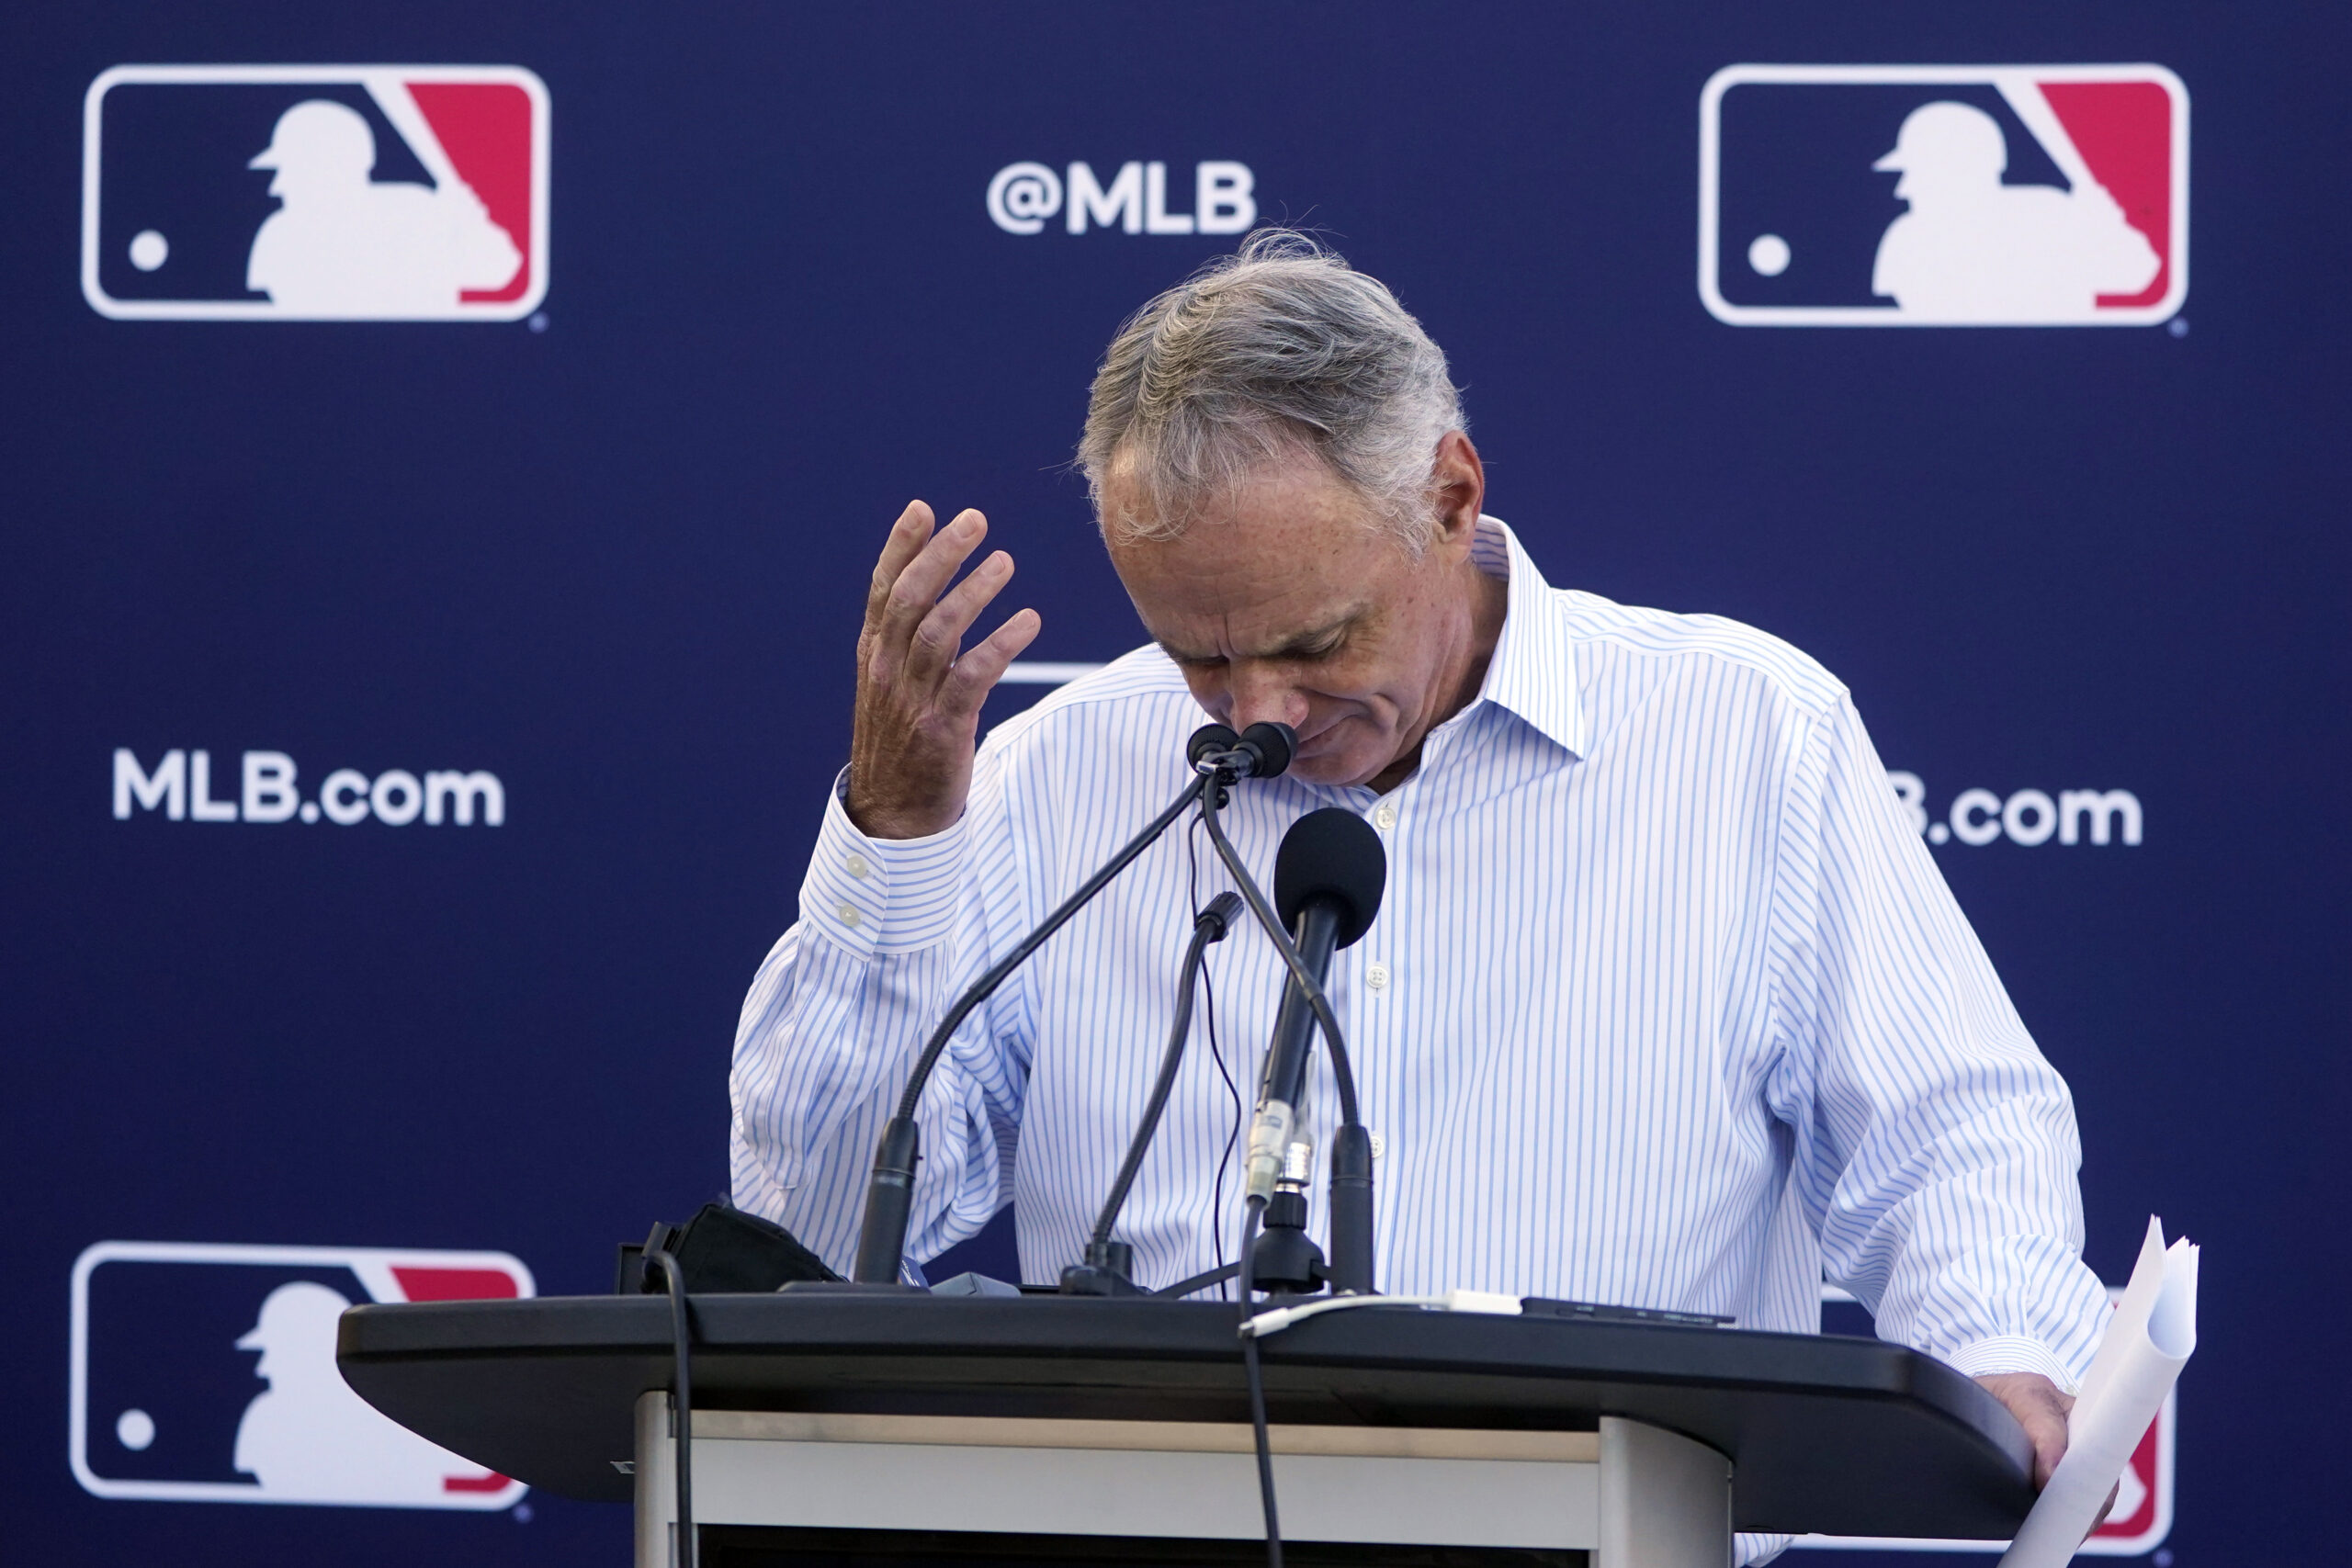 Major League Baseball Commissioner Rob Manfred gestures as he answers questions during a news conference after negotiations with the players' association toward a labor deal, Tuesday, March 1, 2022, at Roger Dean Stadium in Jupiter, Fla. Manfred said he is canceling the first two series of the season that was set to begin March 31, dropping the schedule from 162 games to likely 156 games at most. Manfred said the league and union have not made plans for future negotiations. Players won't be paid for missed games. (AP Photo/Wilfredo Lee)